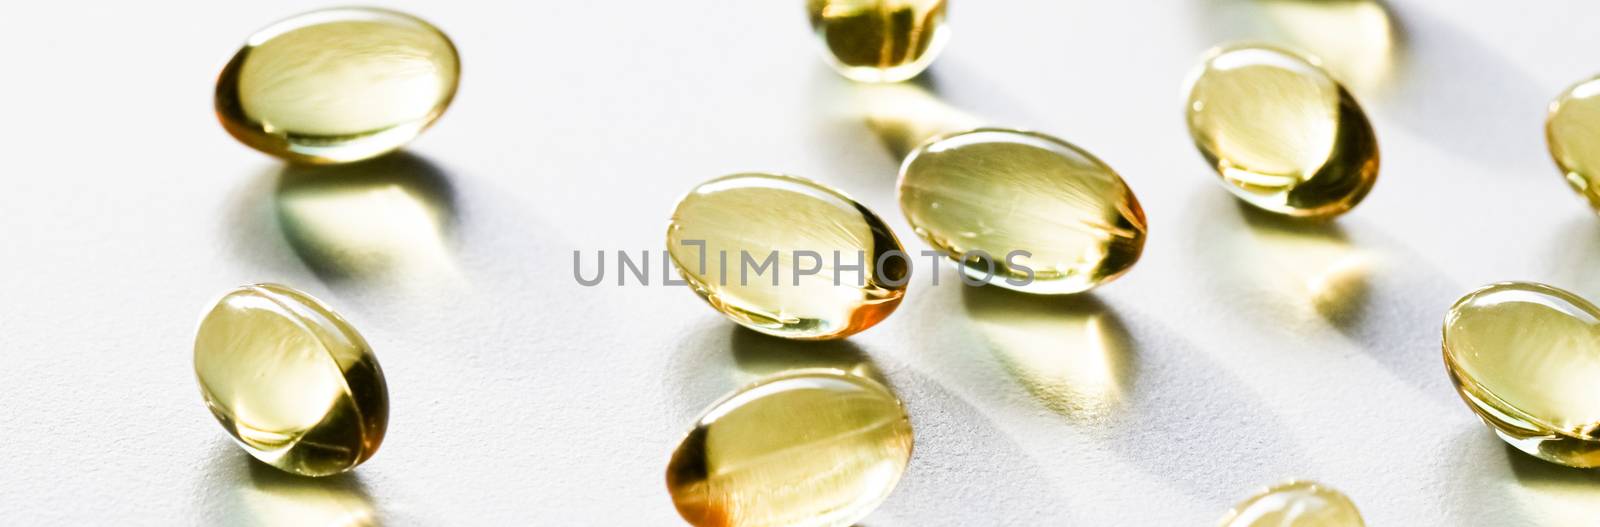 Omega 3 fish oil capsules for healthy diet nutrition, pharma bra by Anneleven